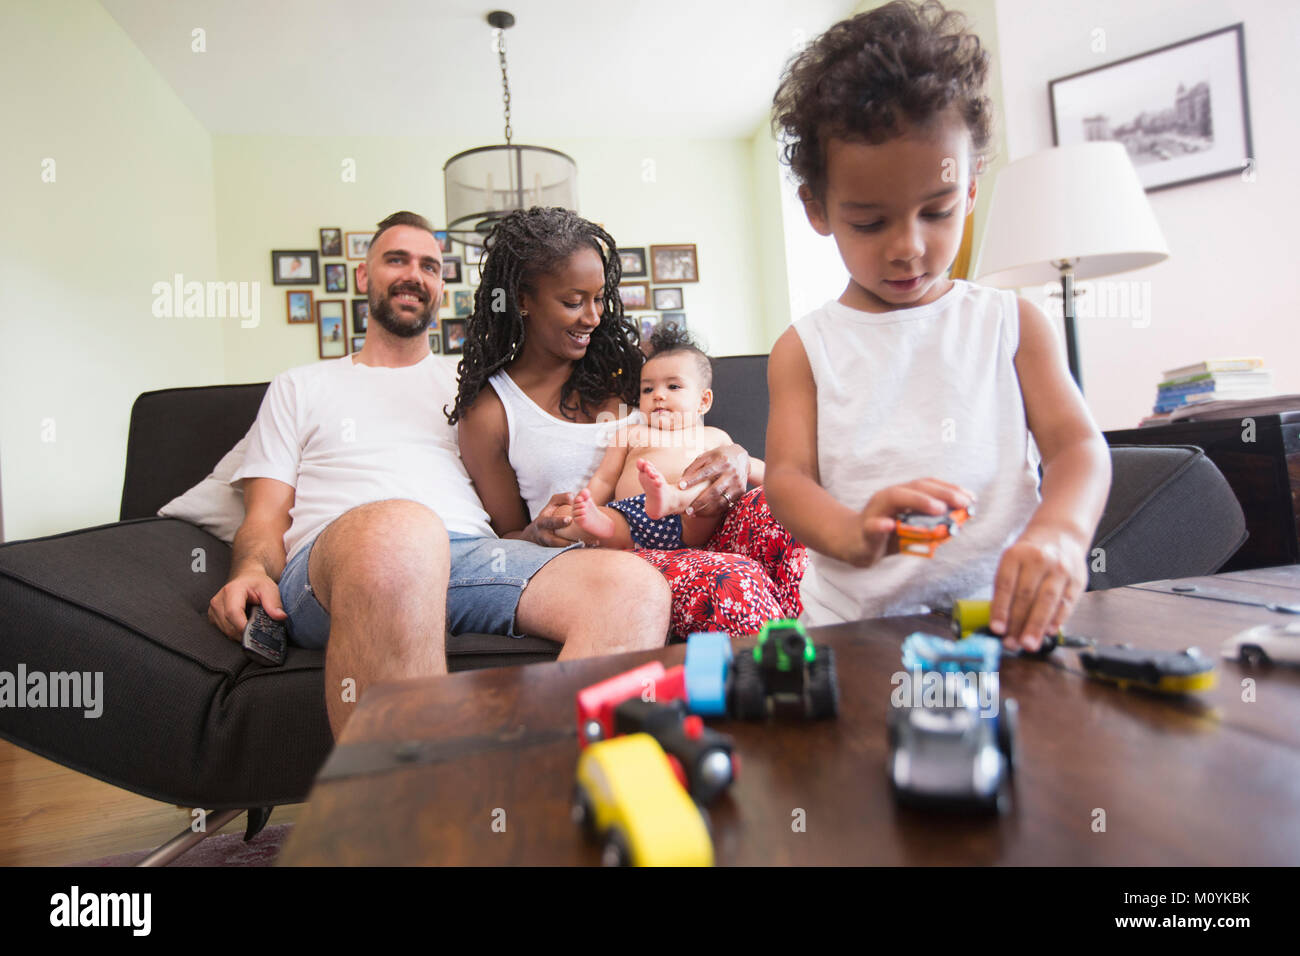 Family relaxing and playing in livingroom Stock Photo